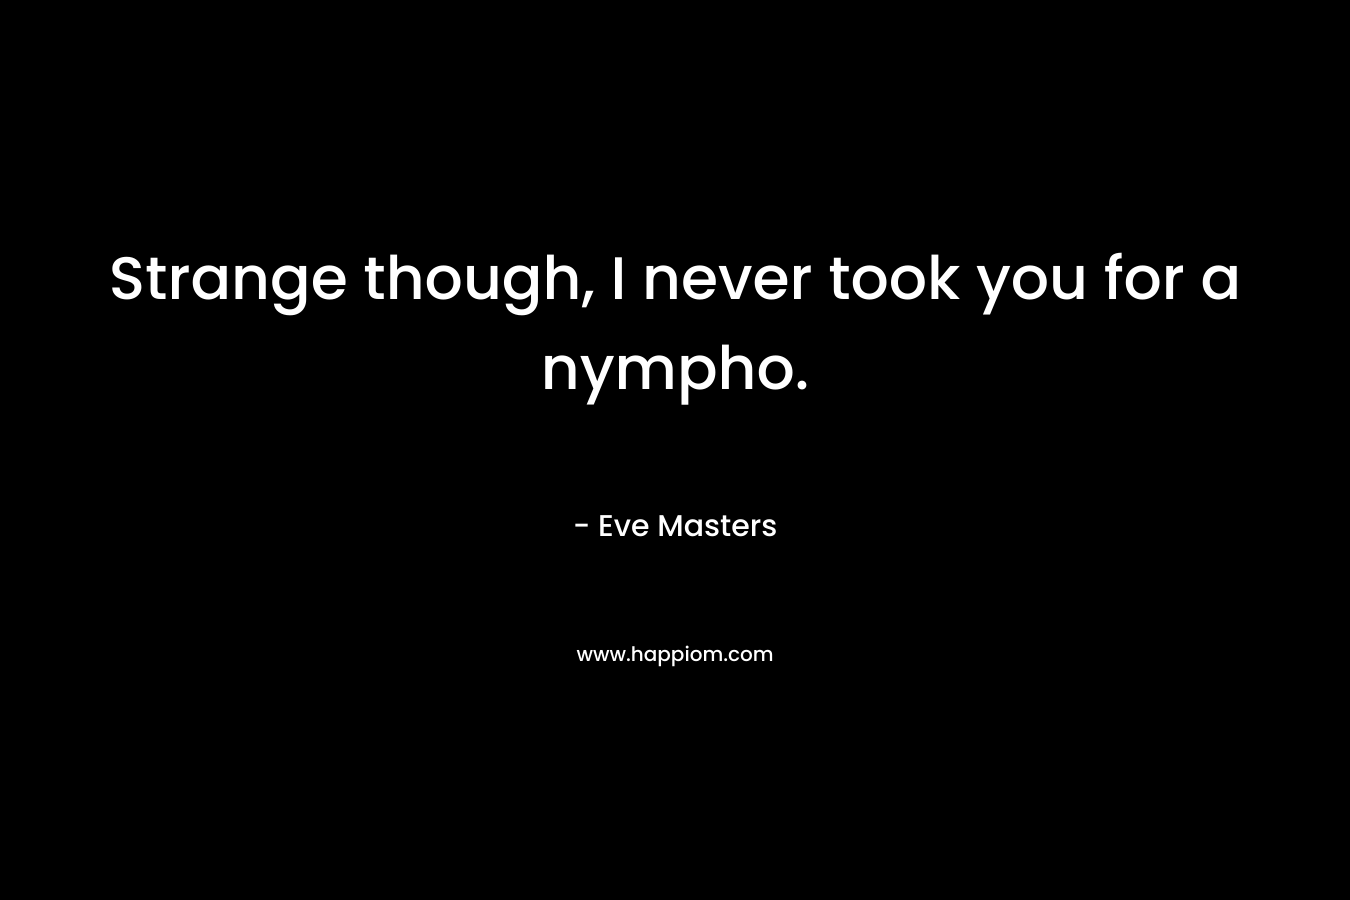 Strange though, I never took you for a nympho. – Eve Masters